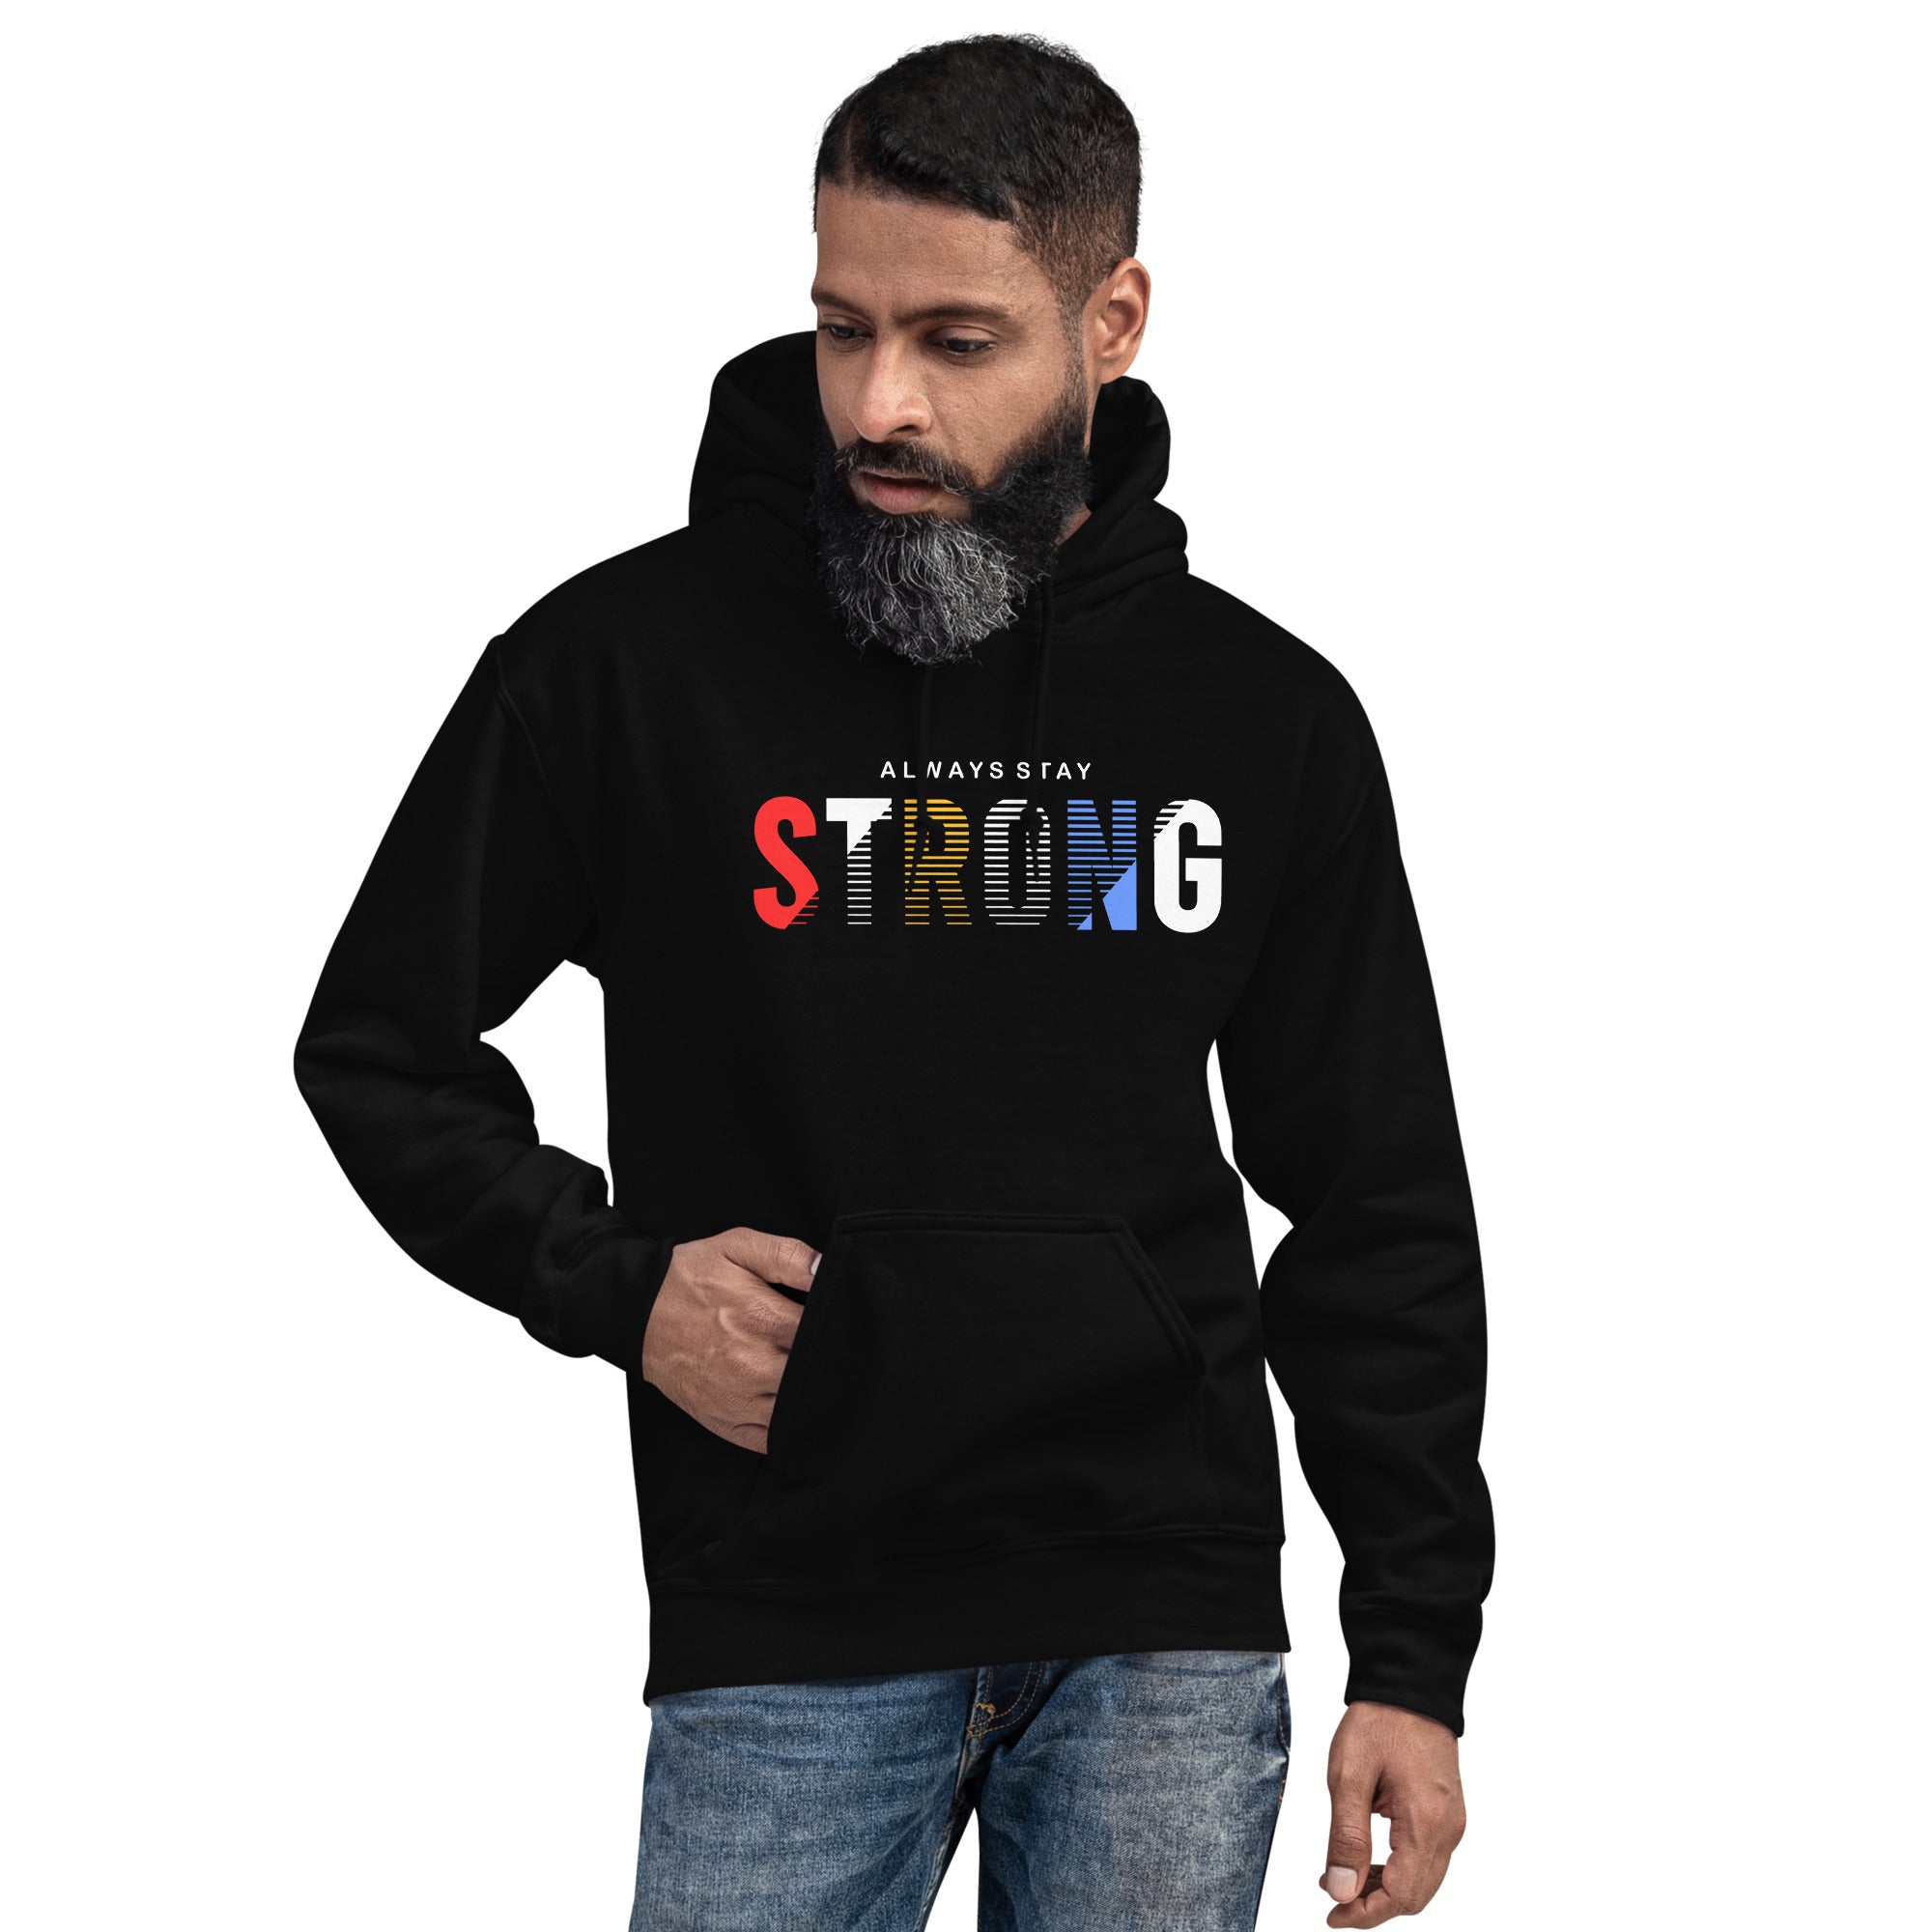 Always Stay Strong - Unisex Hoodie